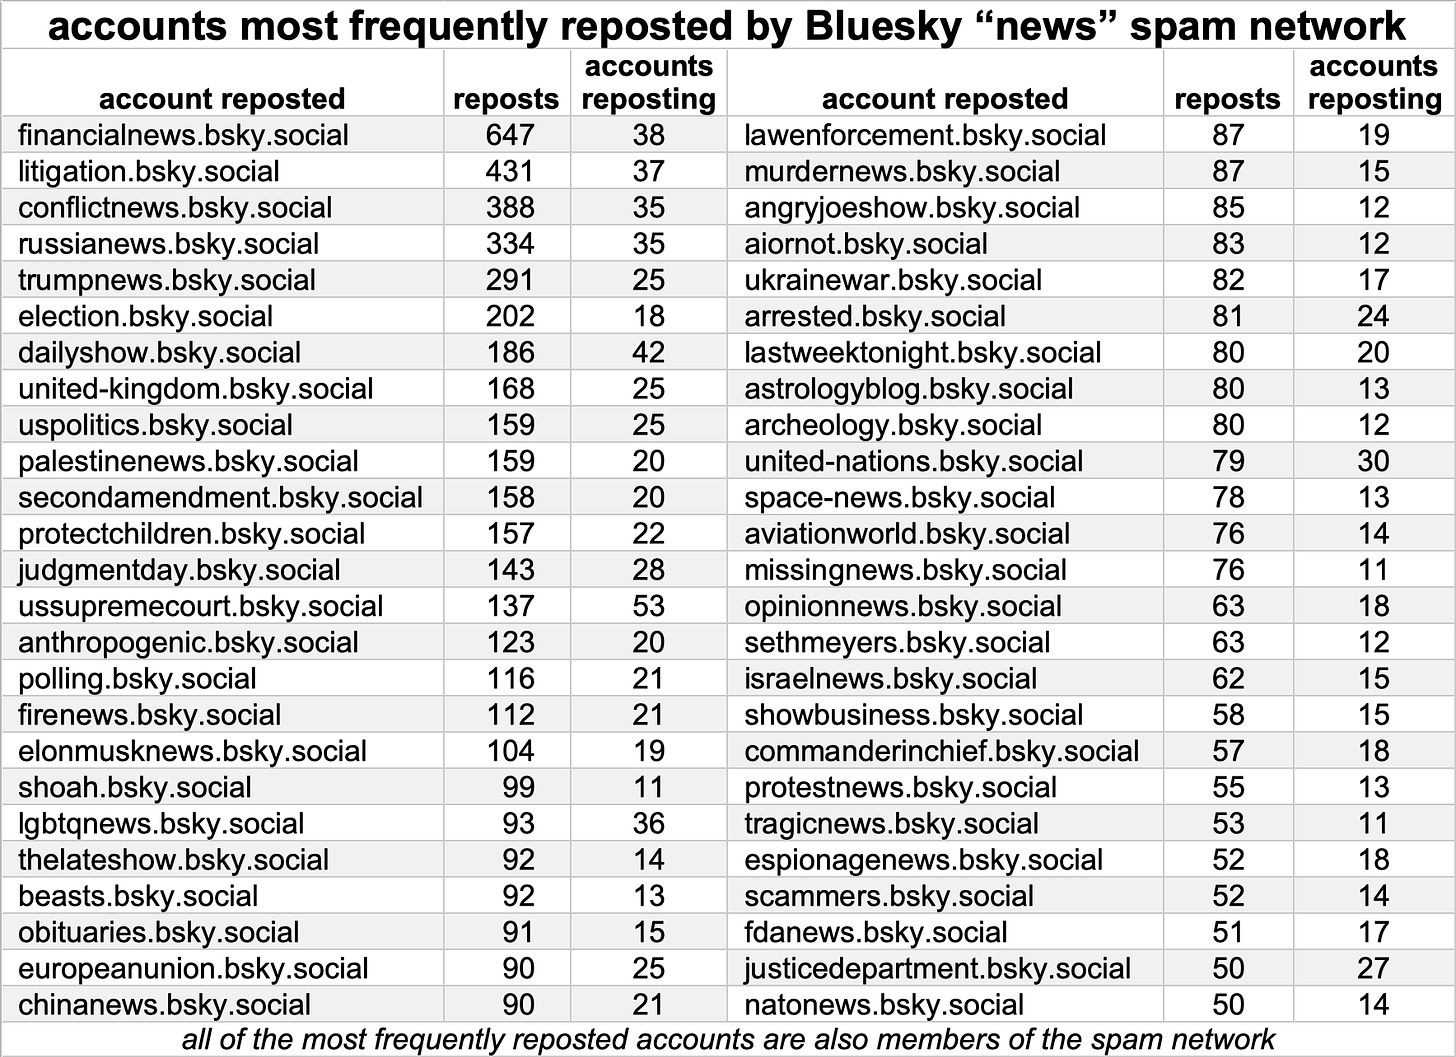 table of the 50 accounts most frequently reposted by the spam network, all of which are members of the spam network